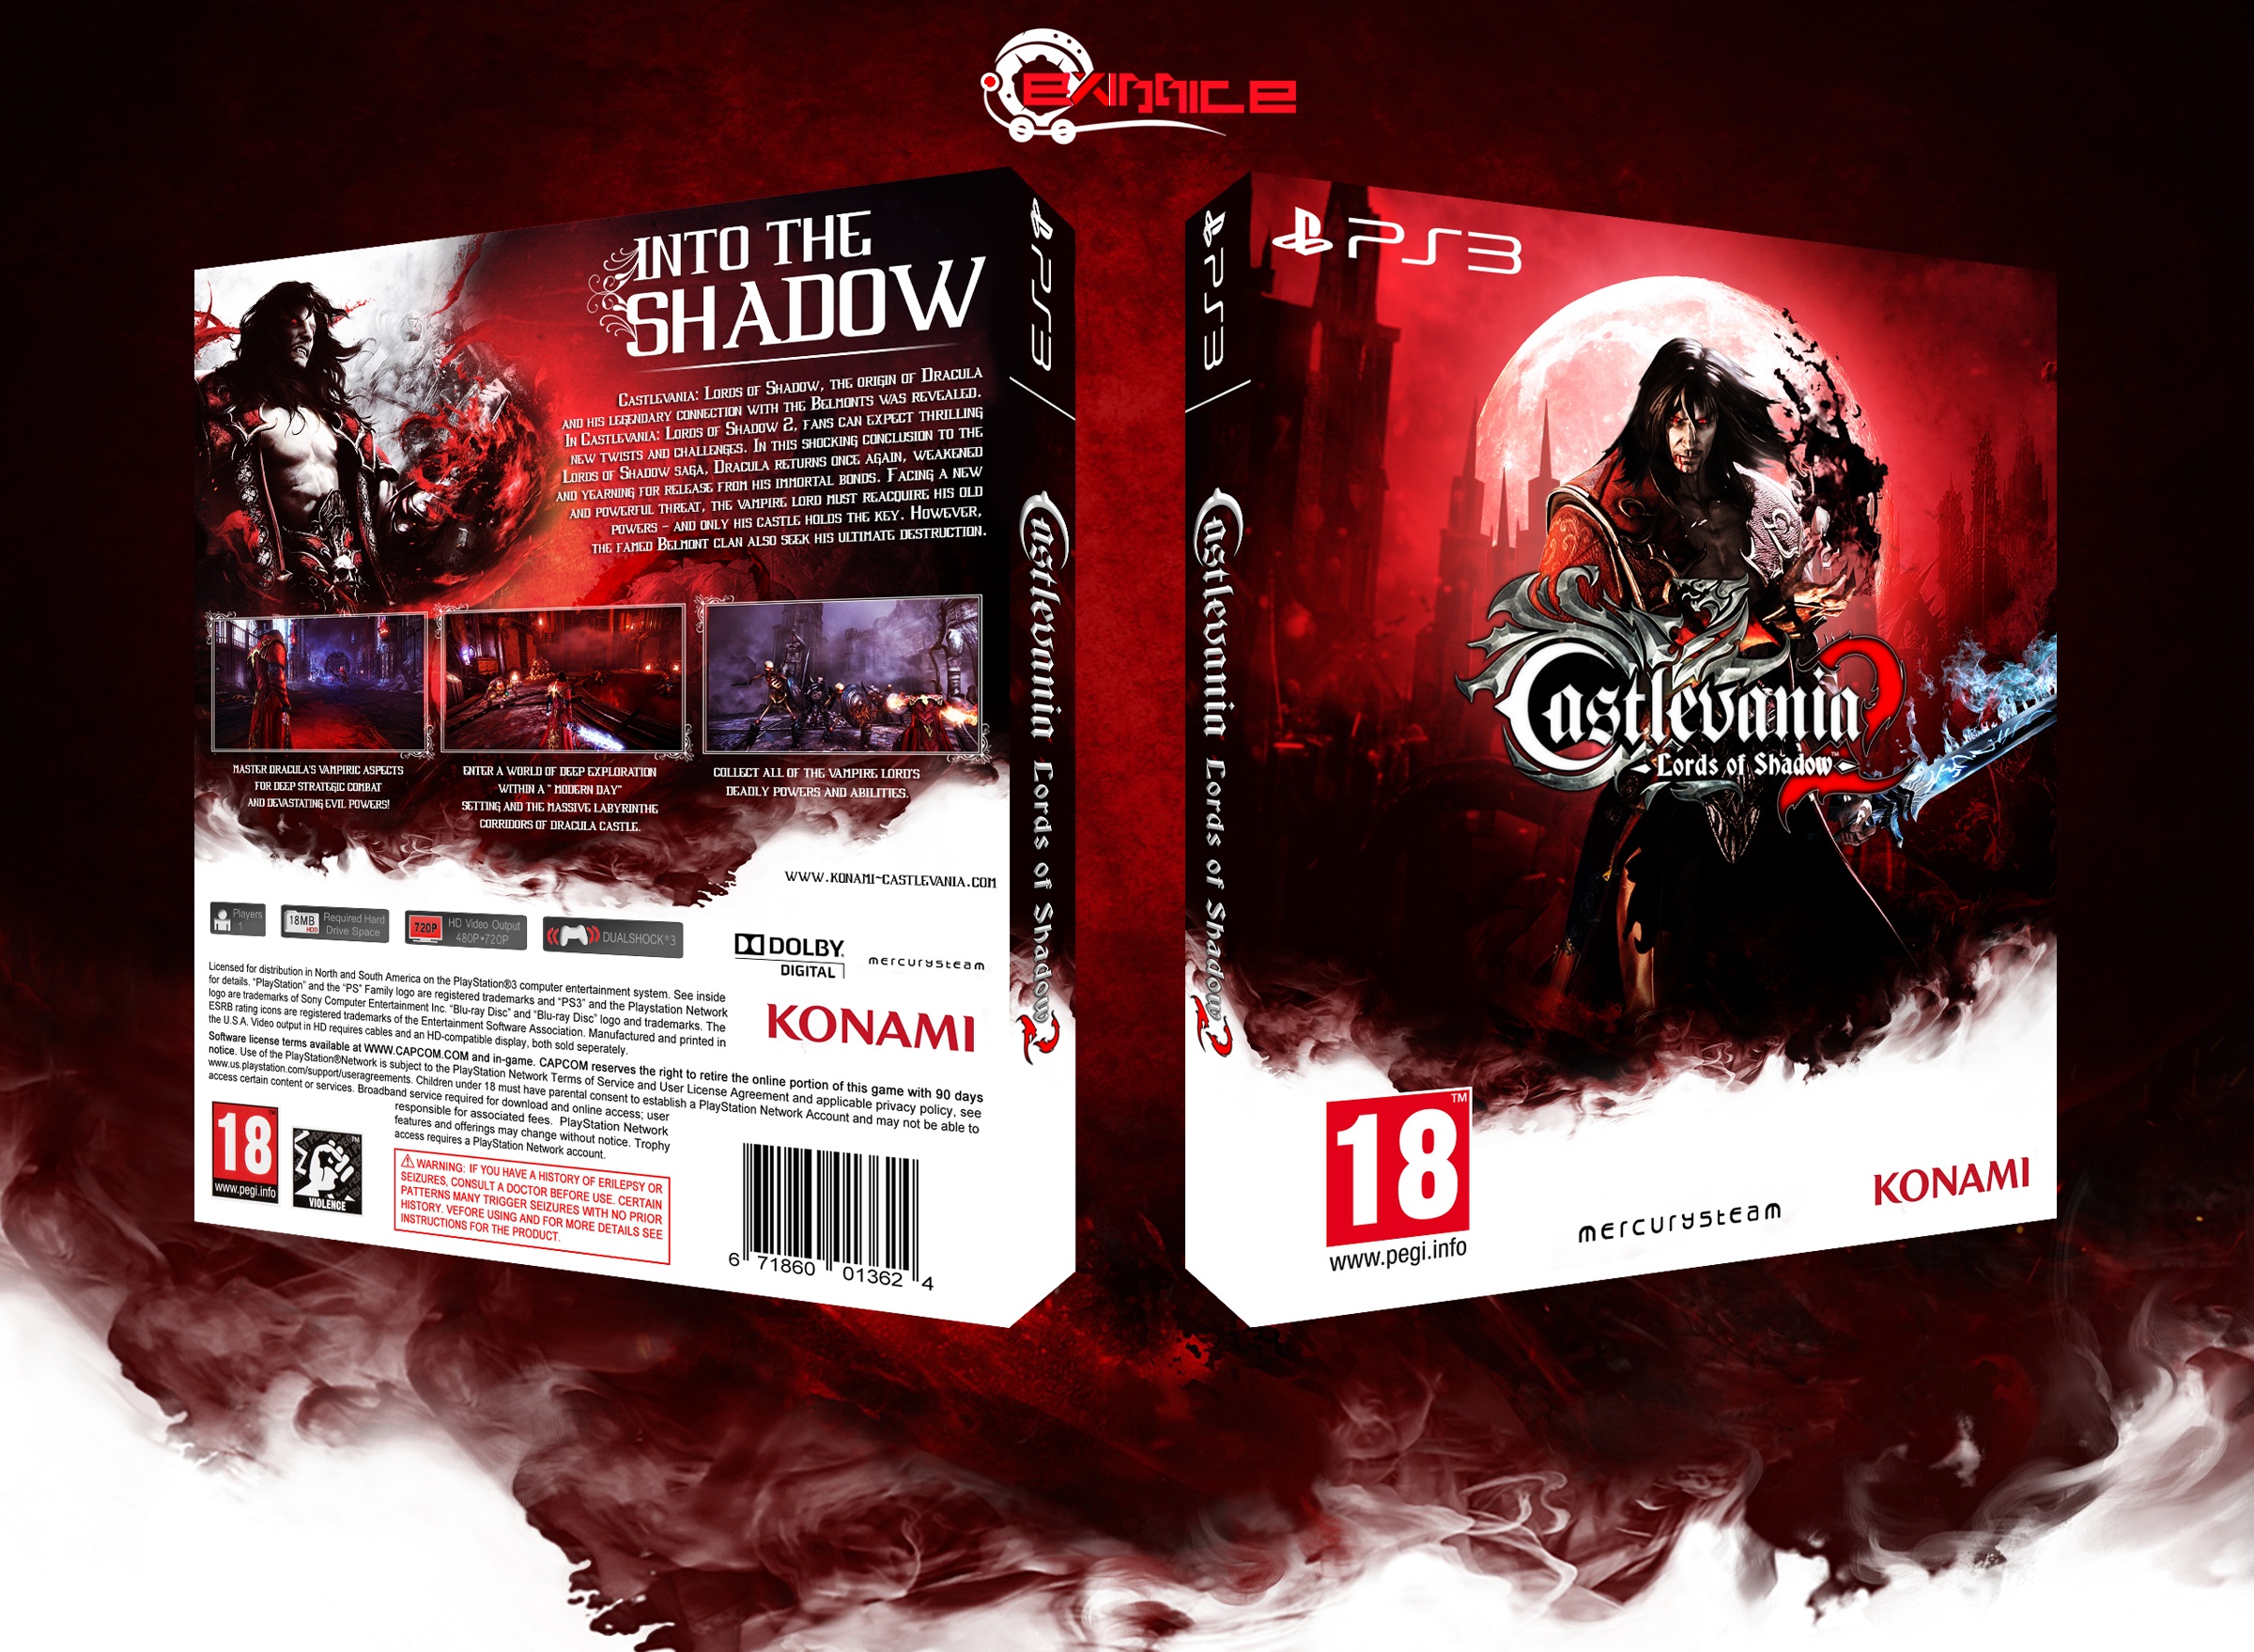 Castlevania: Lords of Shadow 2 Used PS3 Games For Sale Retro